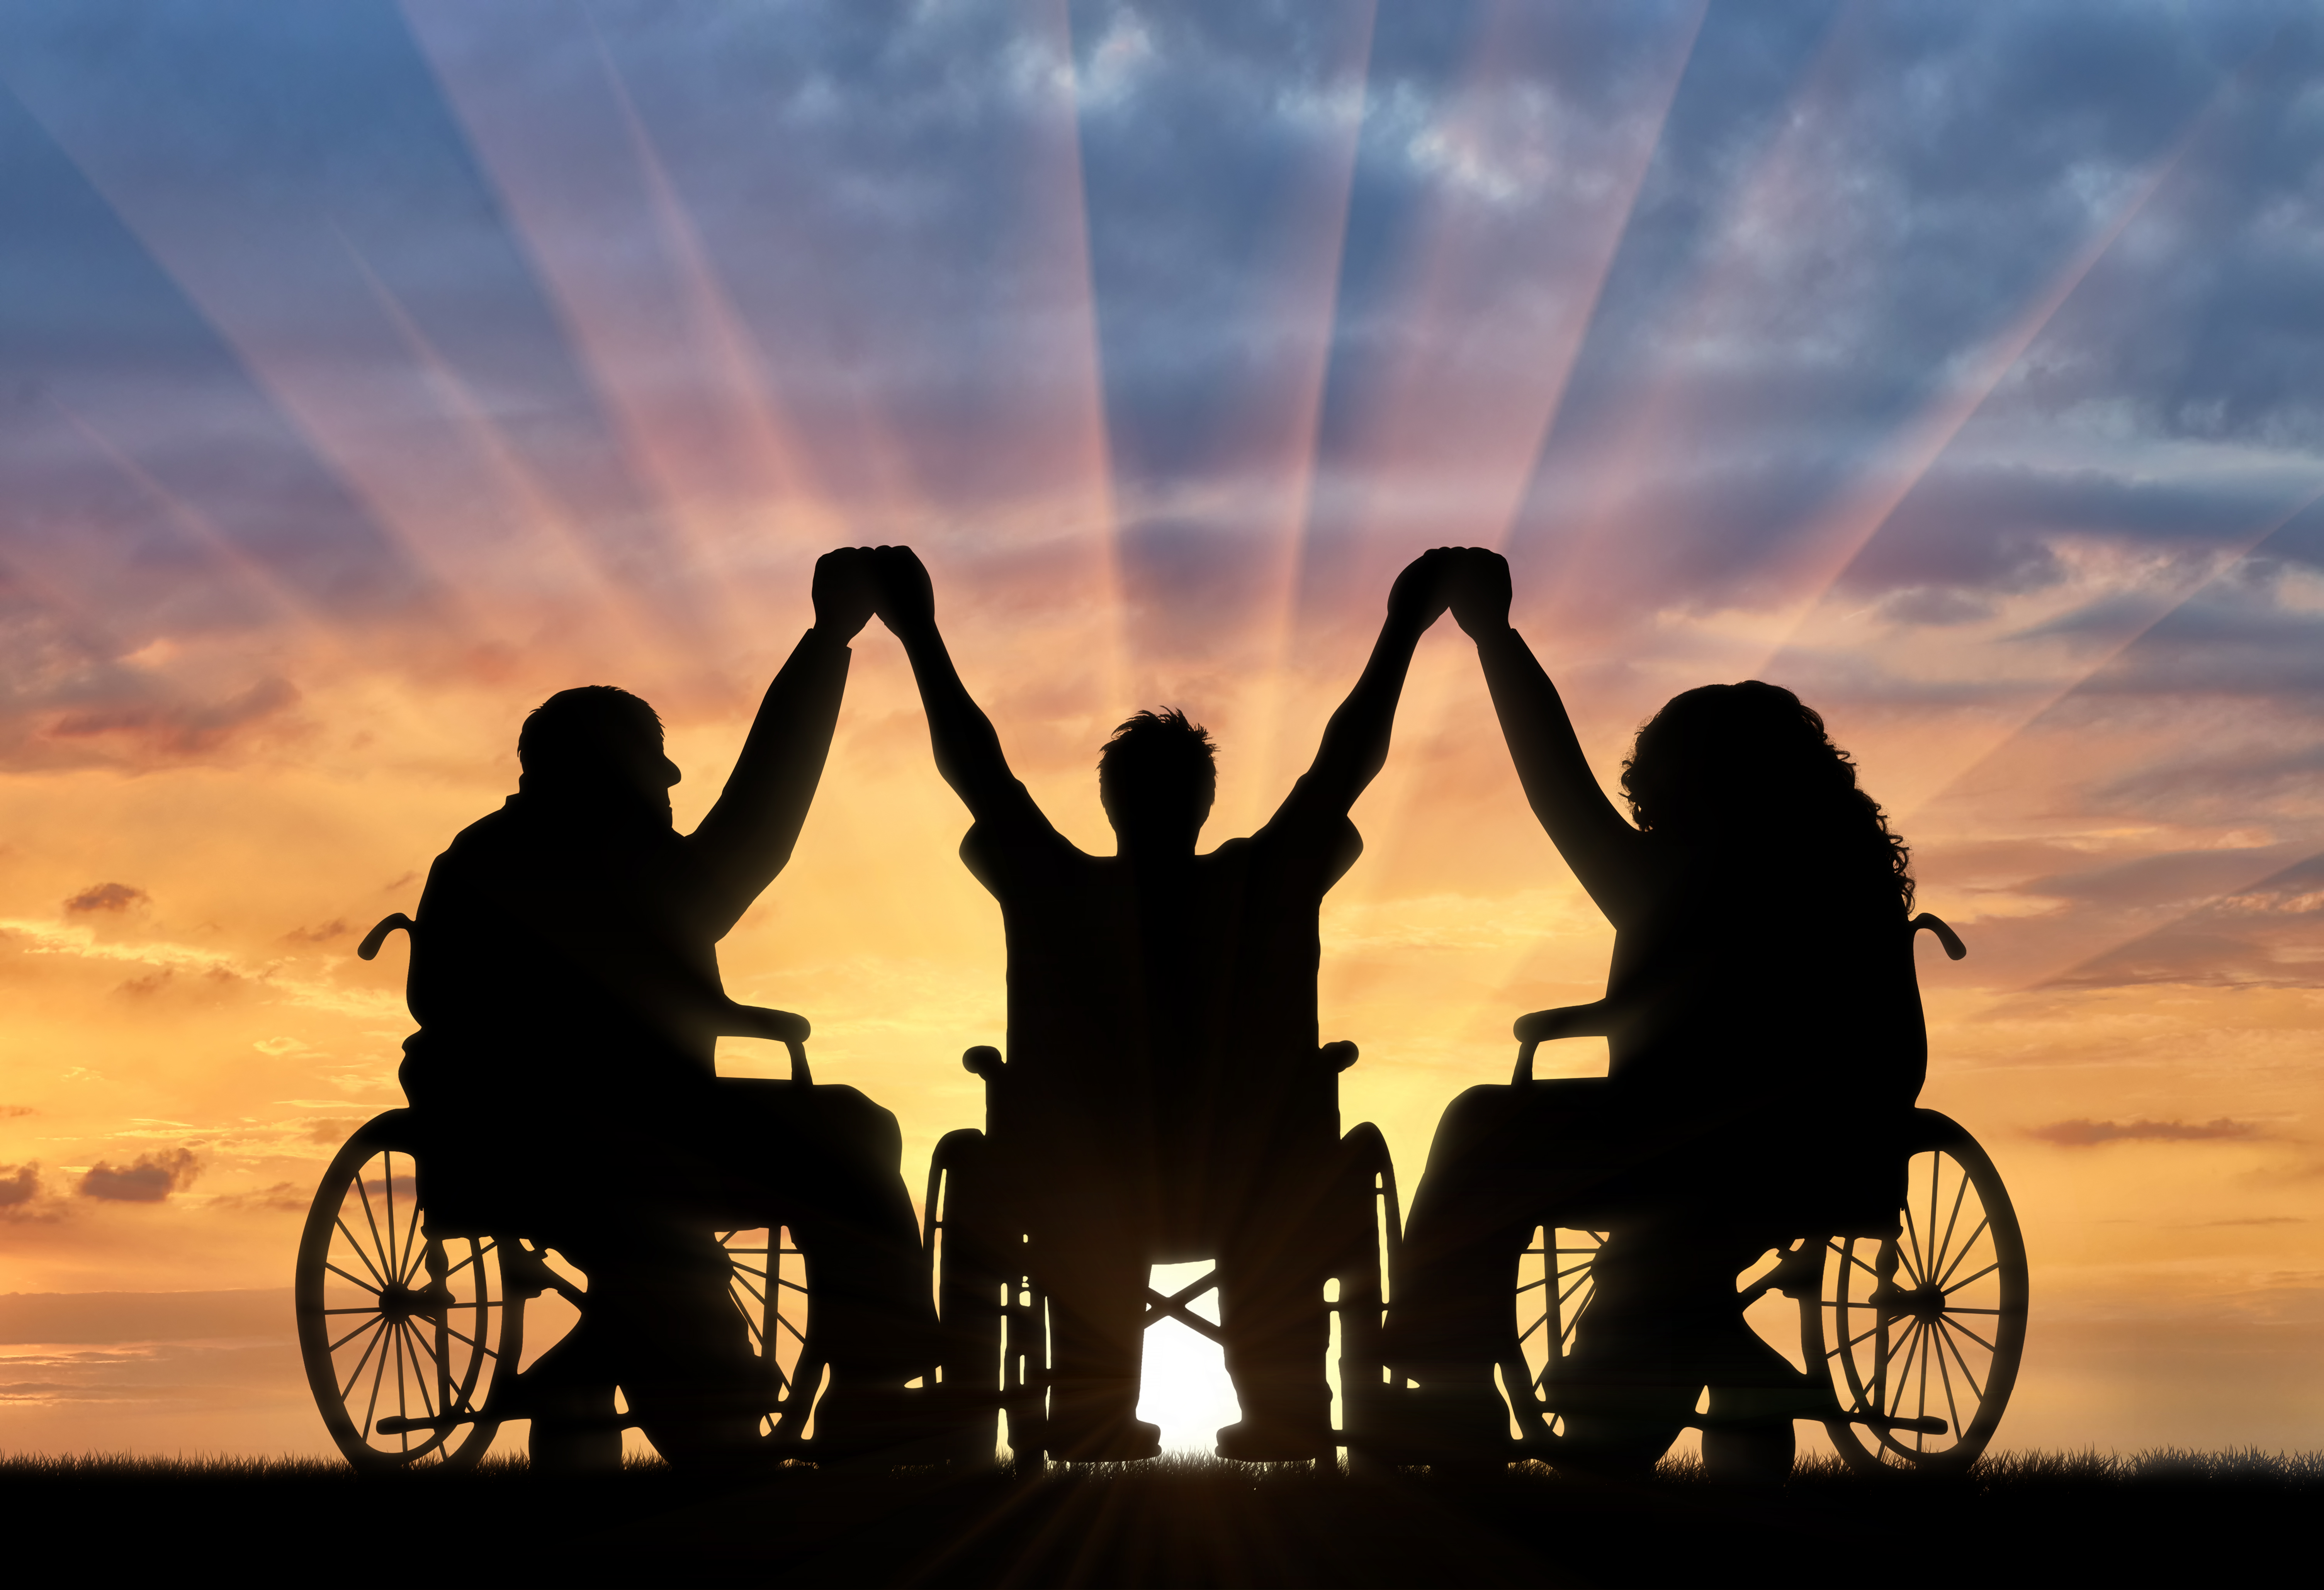 3 people in wheelchairs holding hands